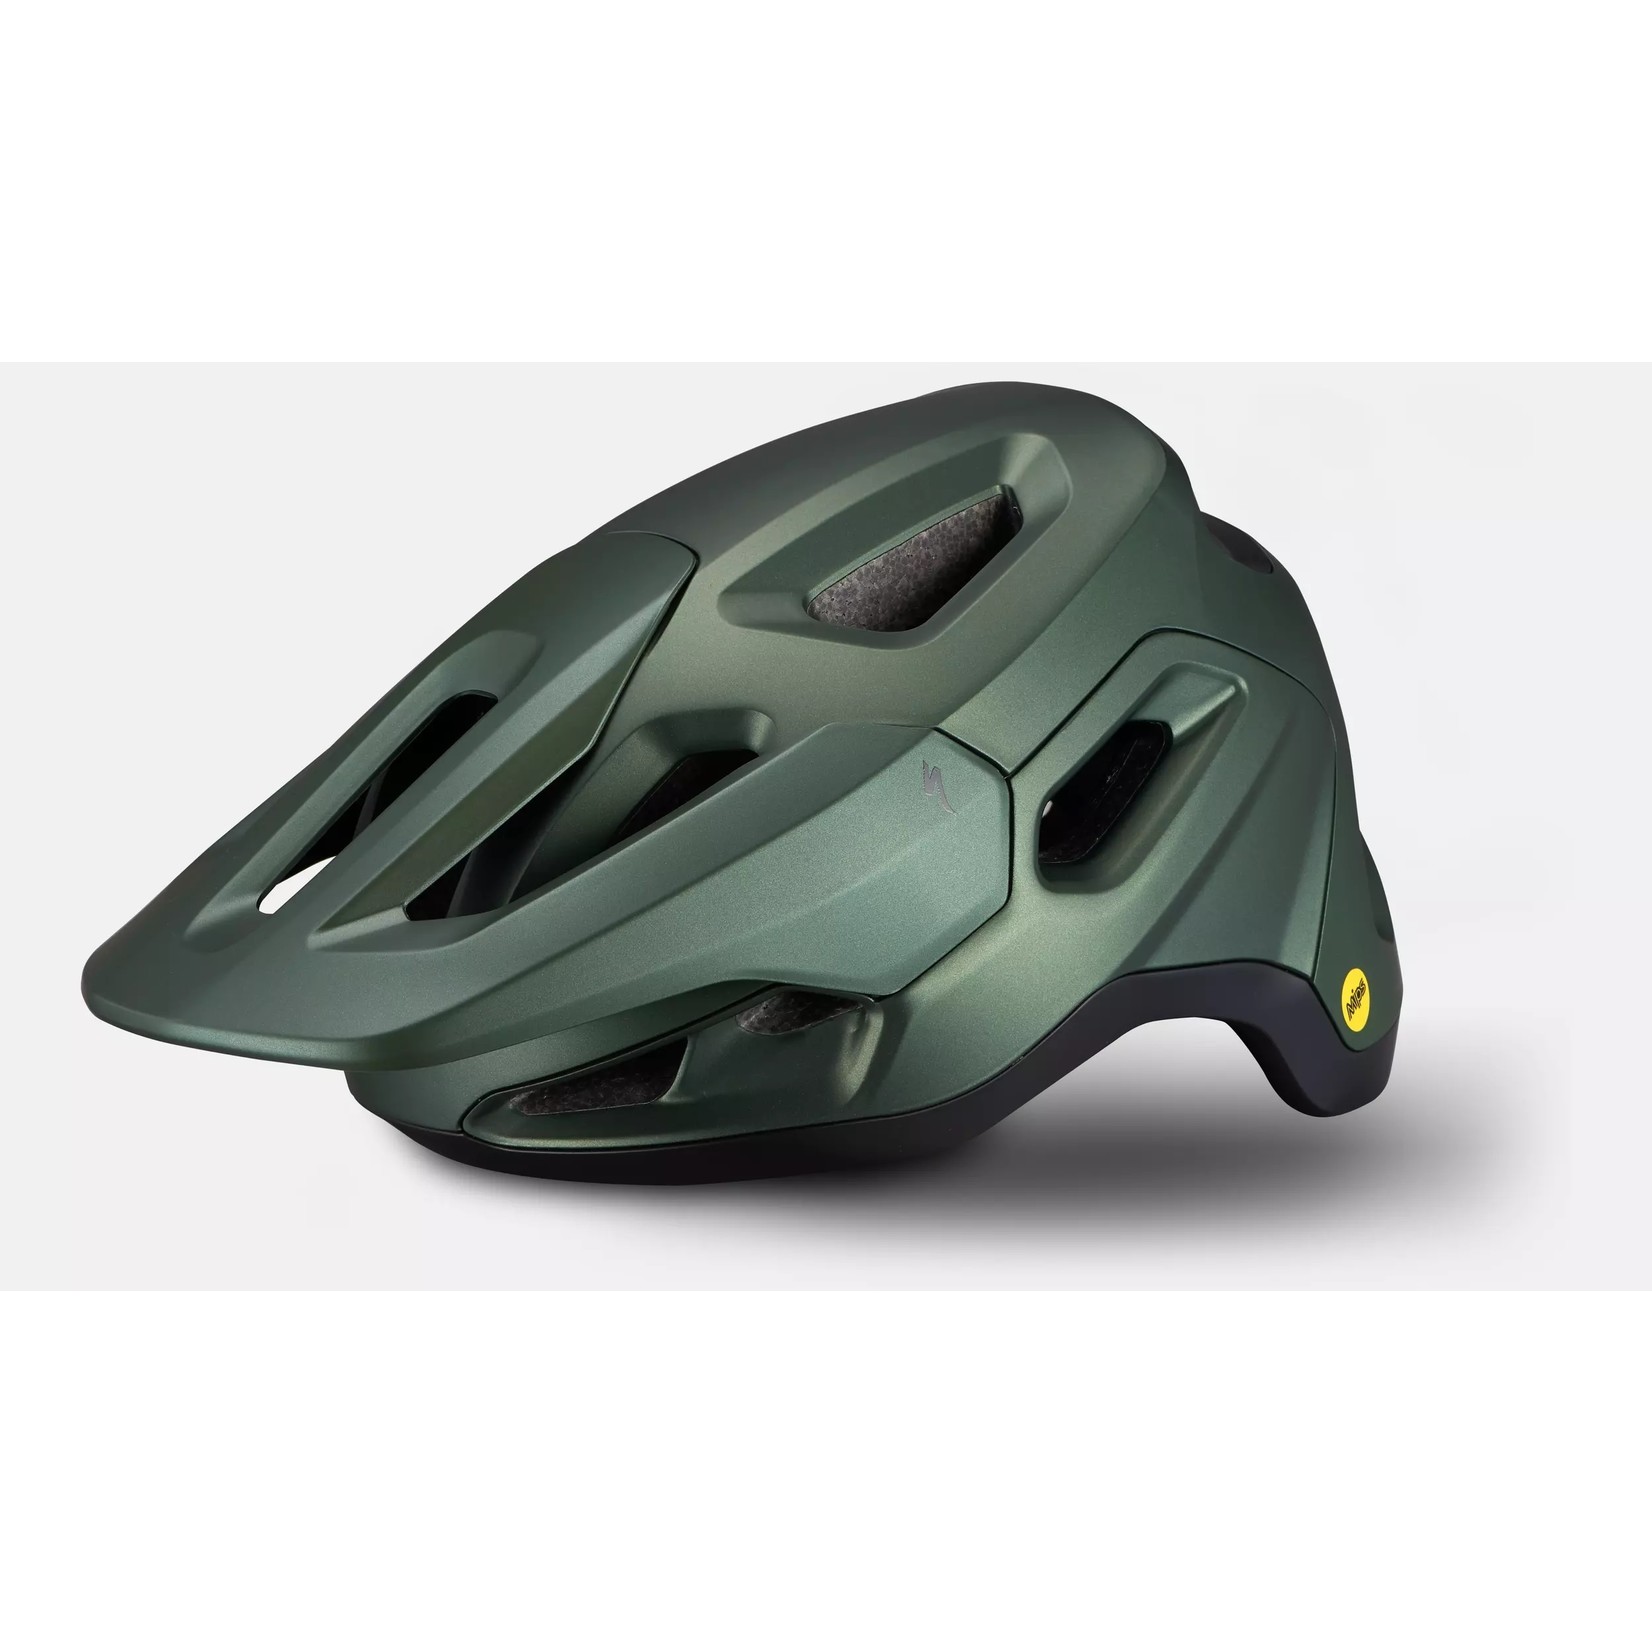 Specialized Specialized Tactic 4 Helmet